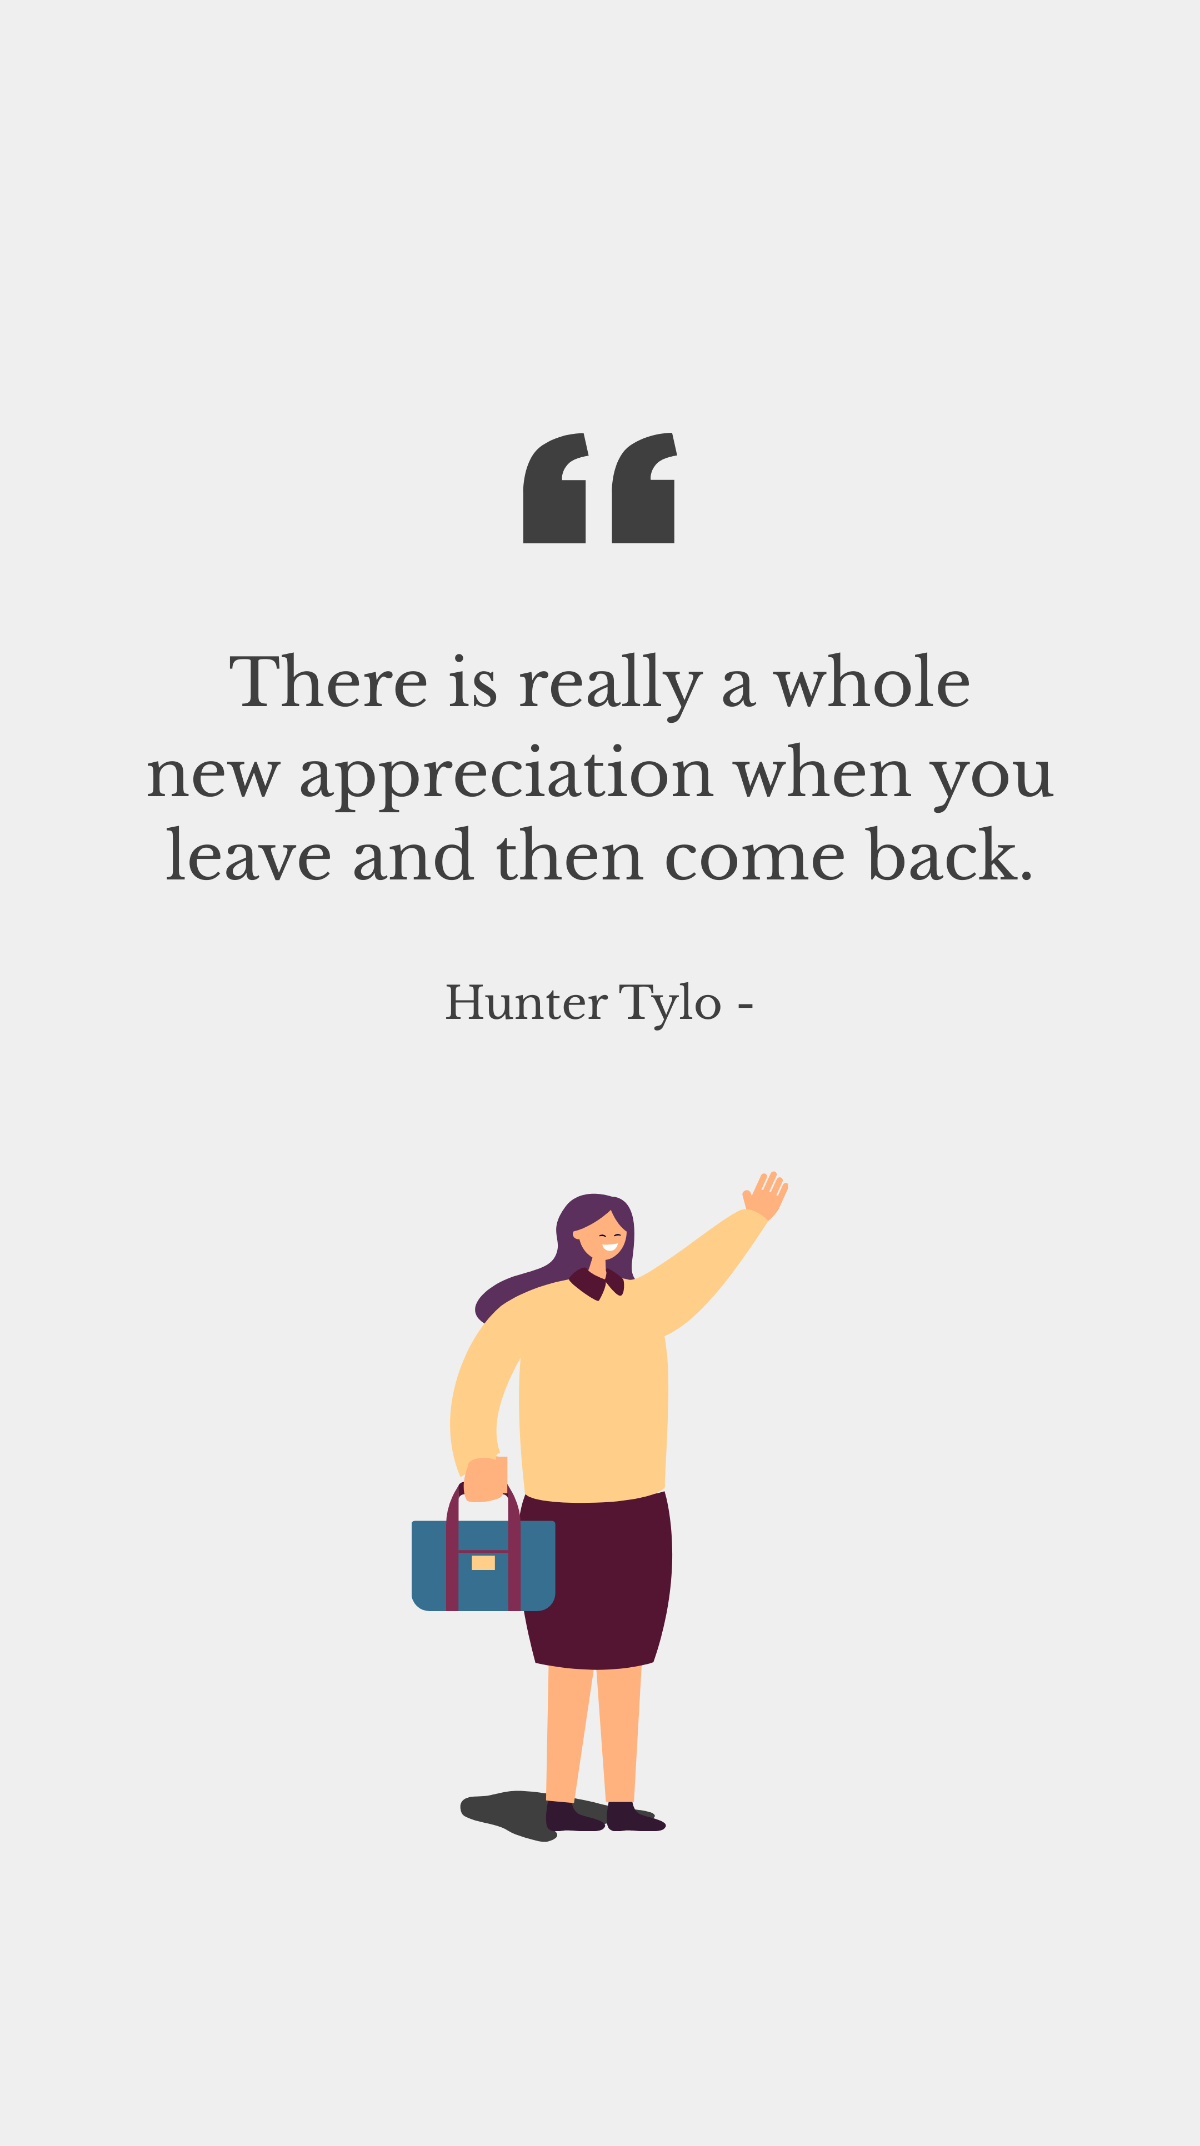 Hunter Tylo - There is really a whole new appreciation when you leave and then come back.